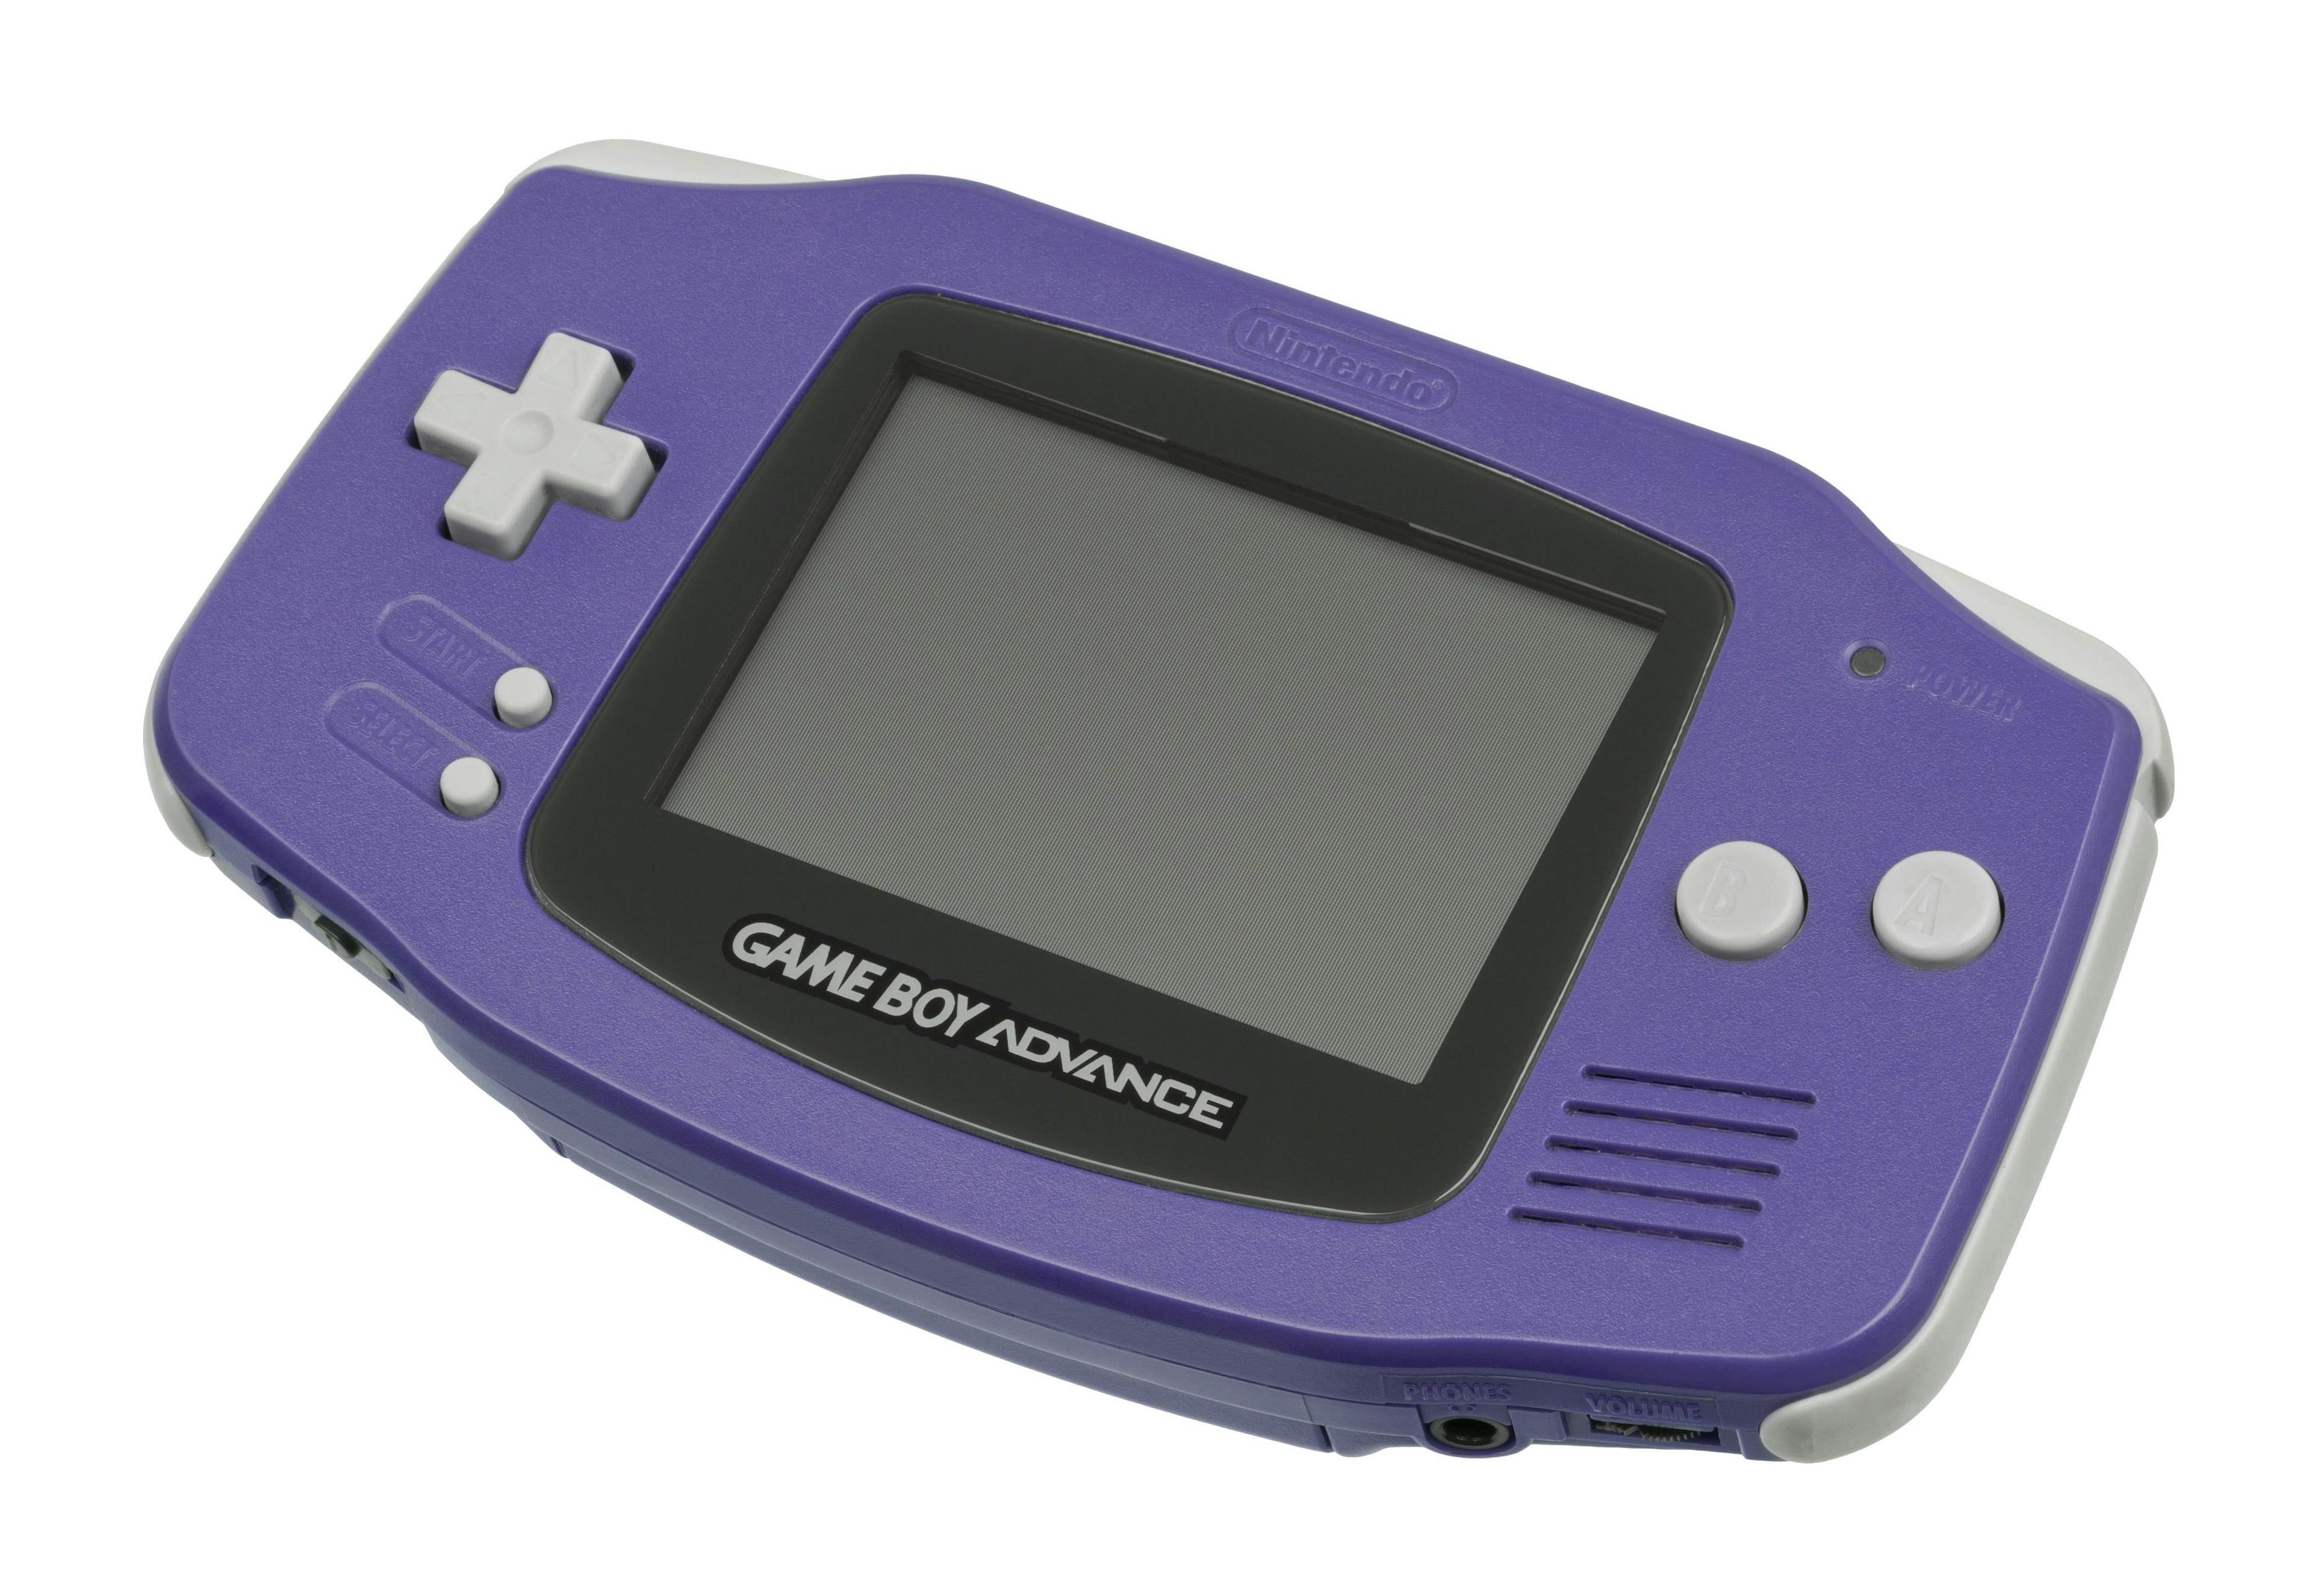 My Game Boy Advance was the perfect tragedy for a healthy life